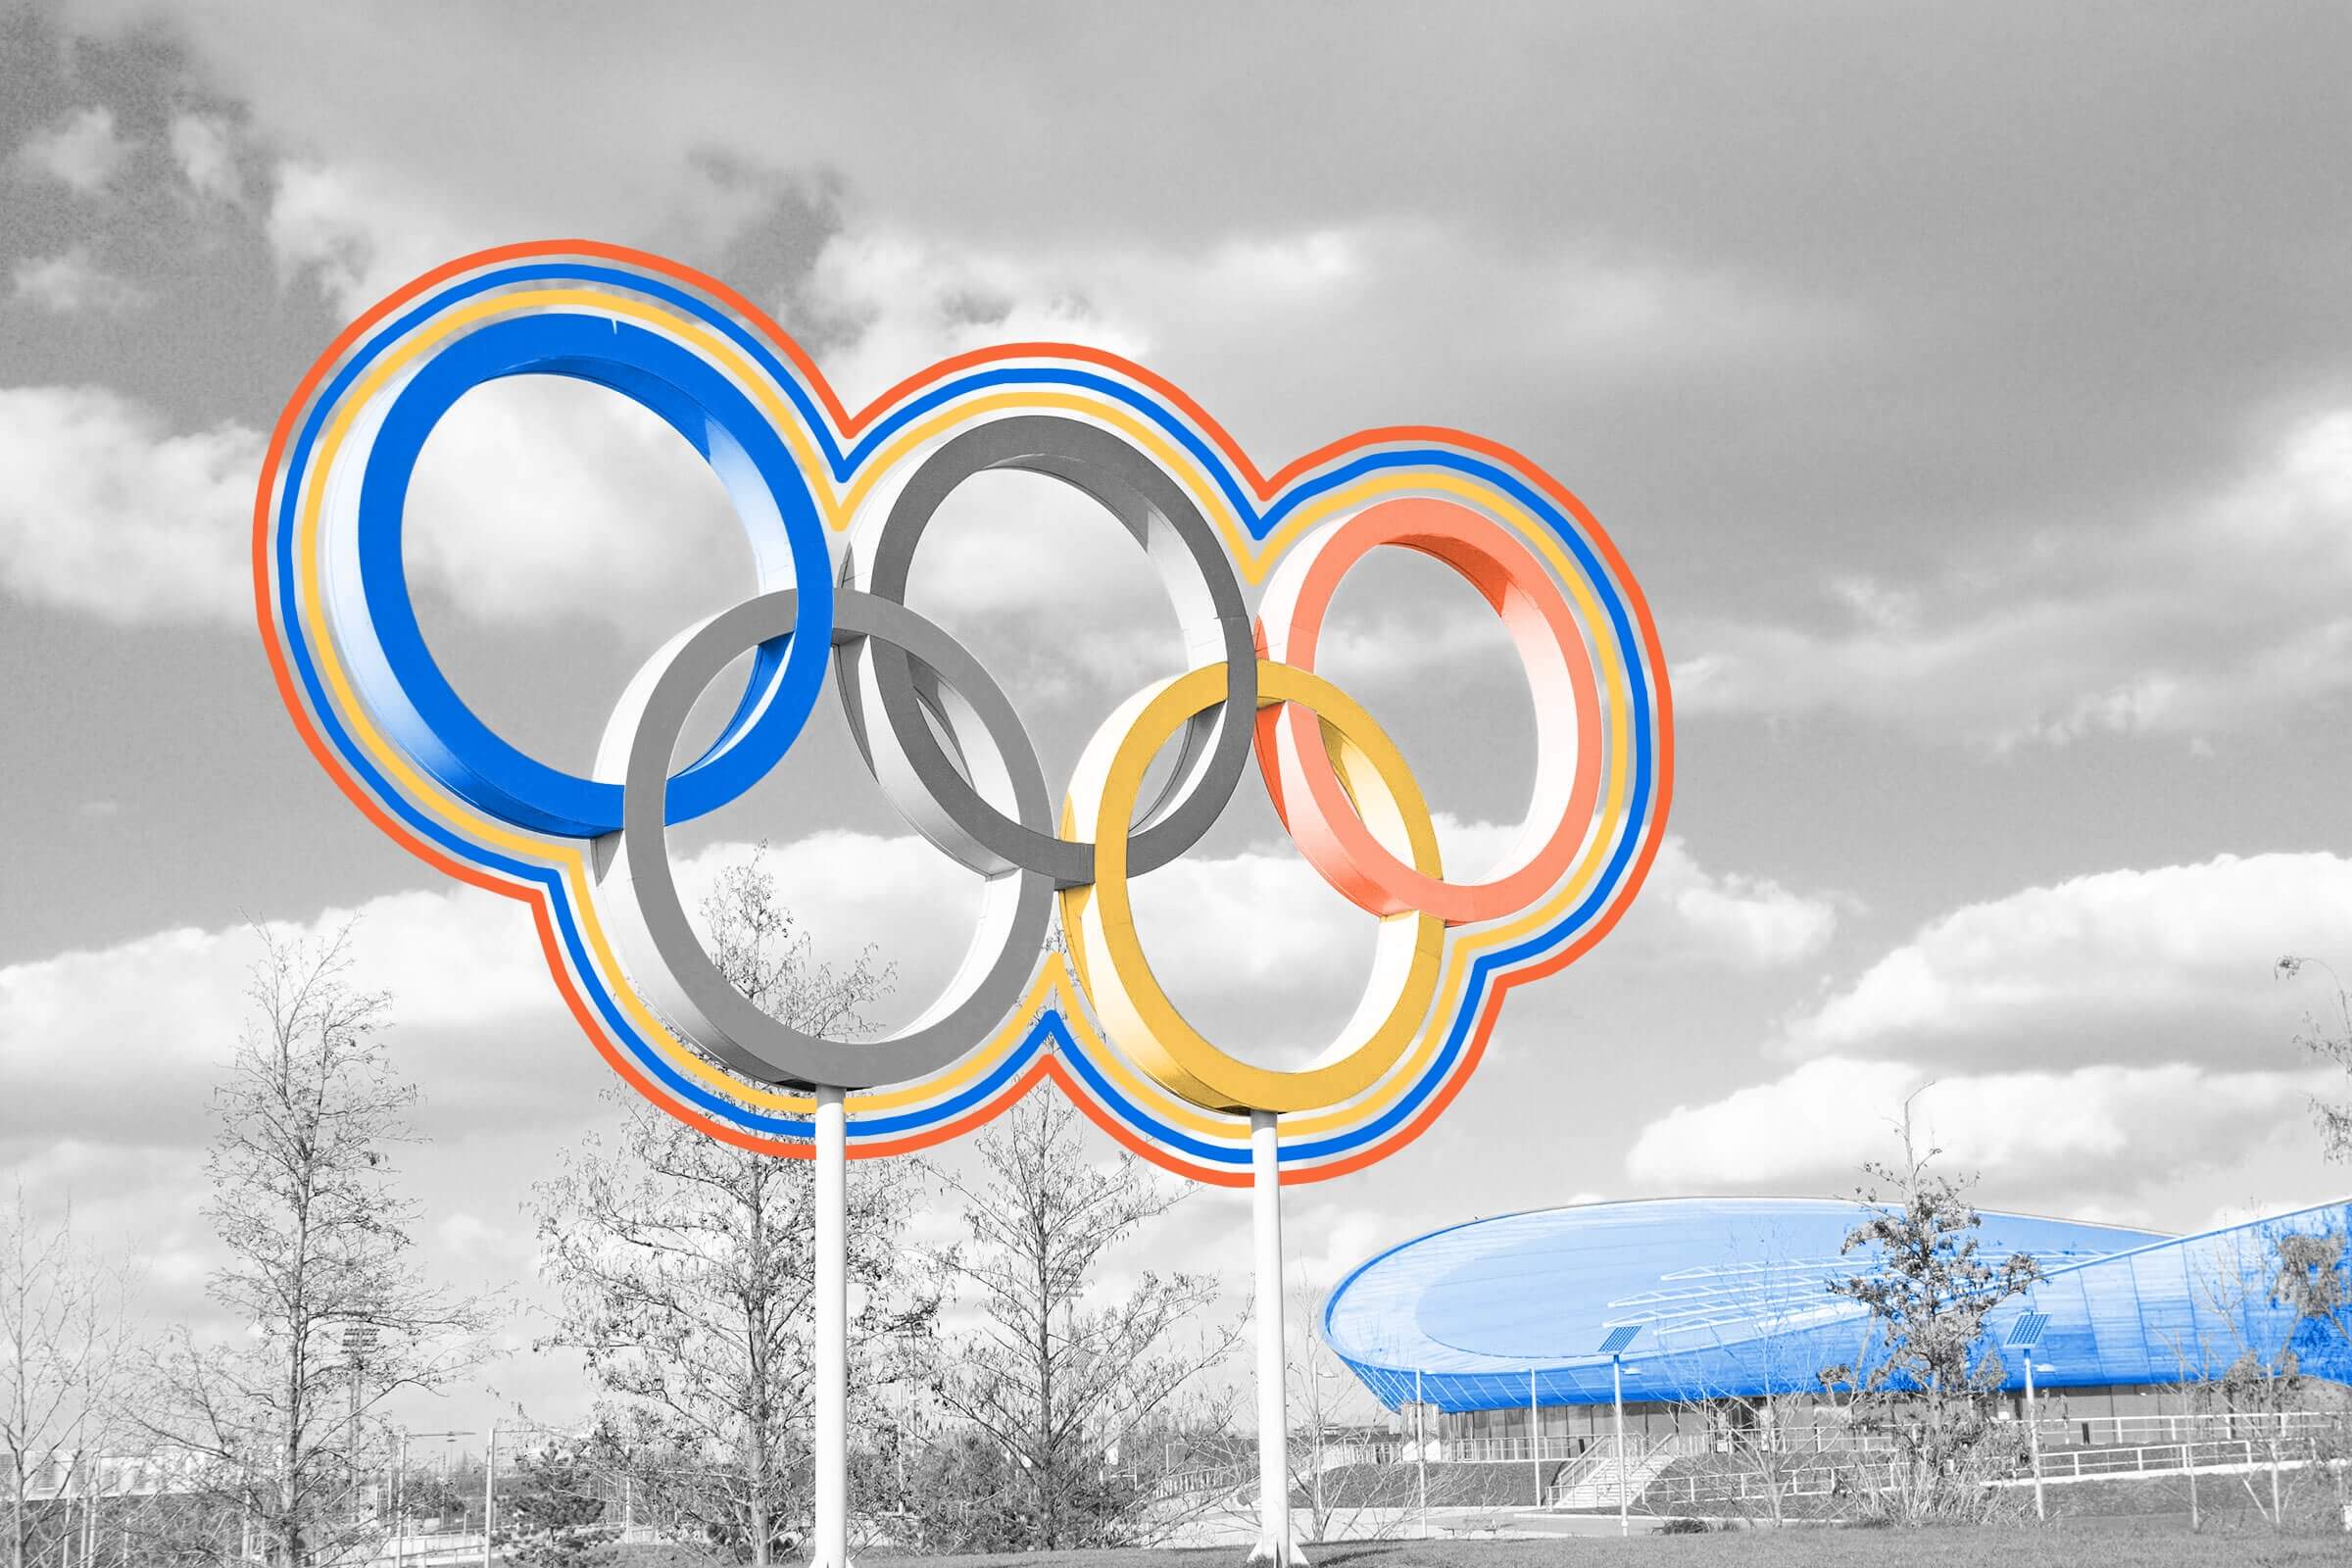 Architecture was once an Olympic event.